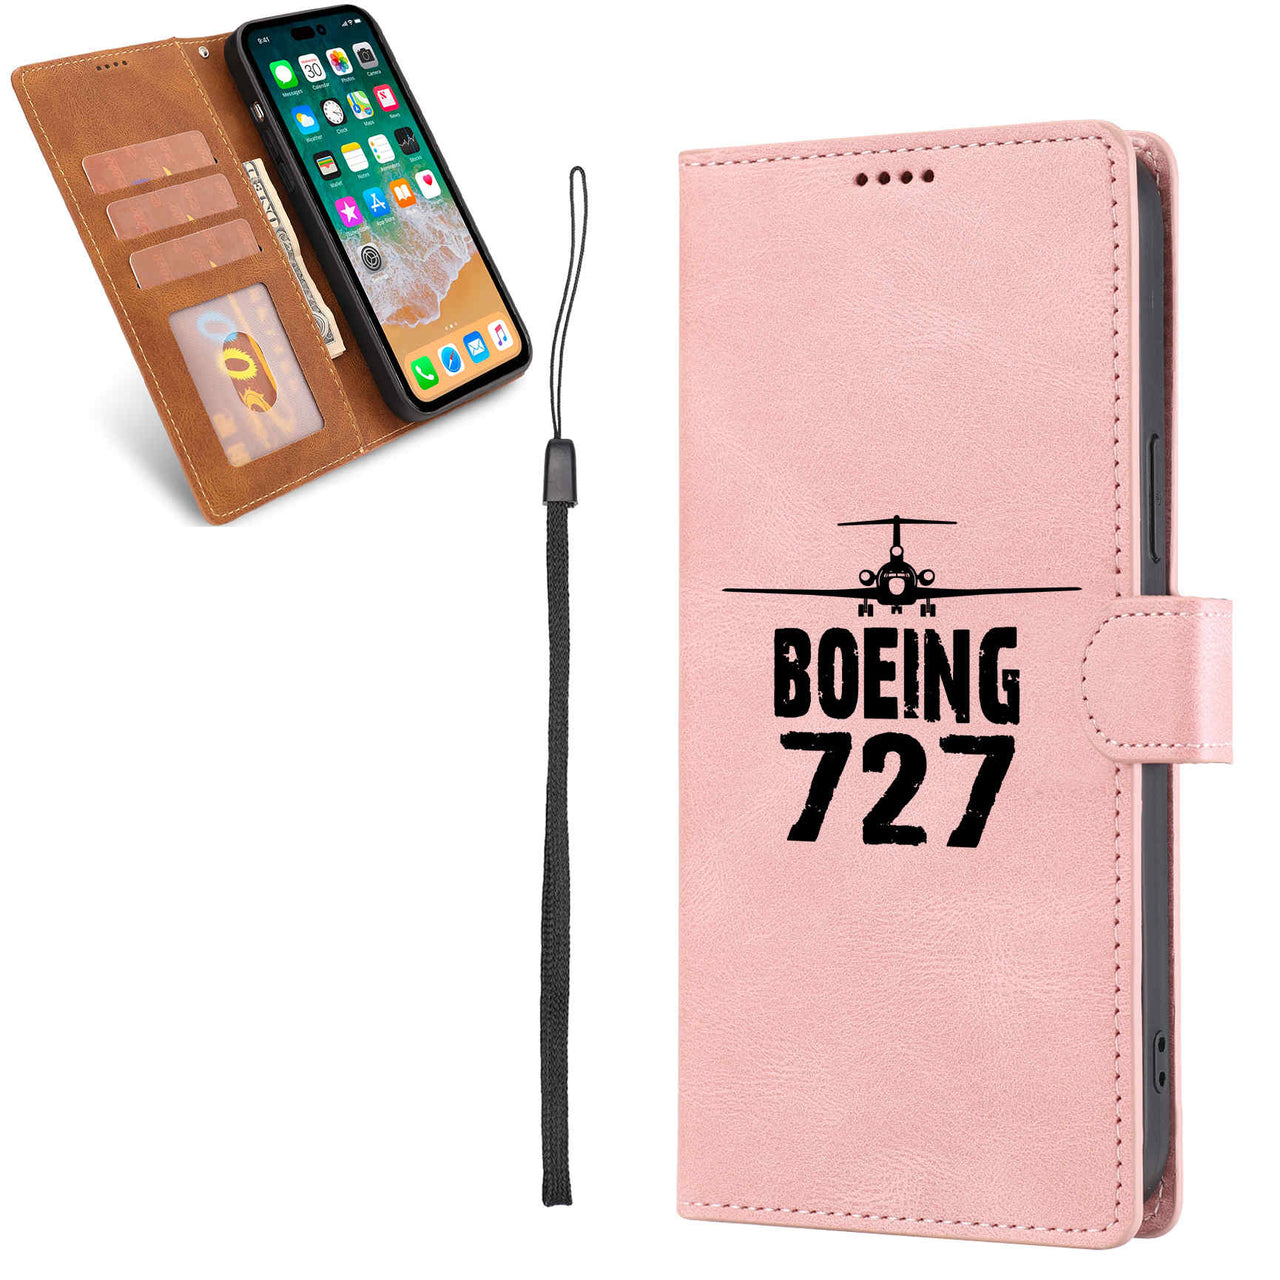 Boeing 727 & Plane Designed Leather Samsung S & Note Cases